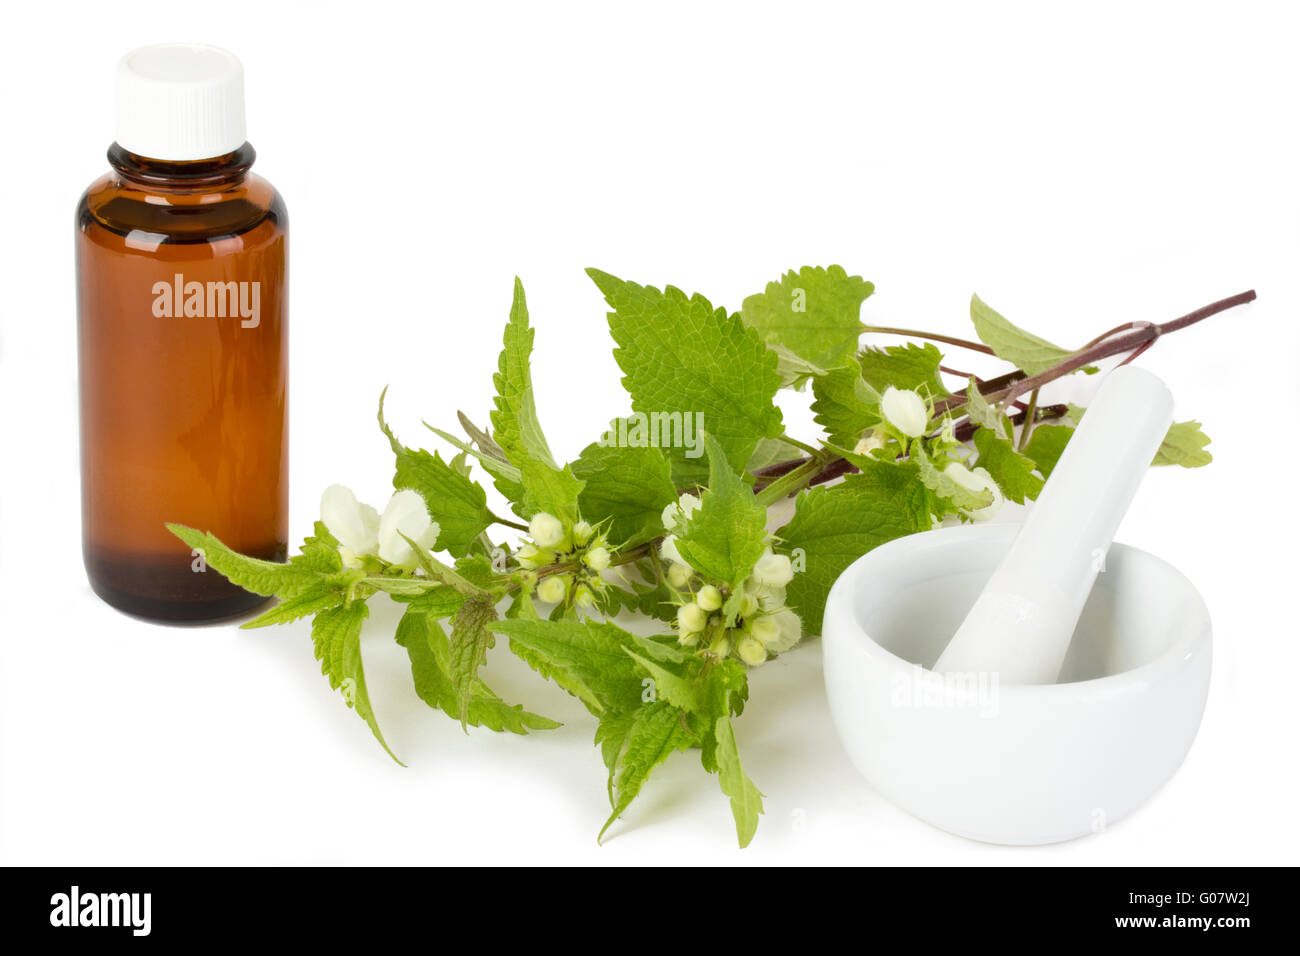 Stinging nettle with medicine bottle and mortar Stock Photo